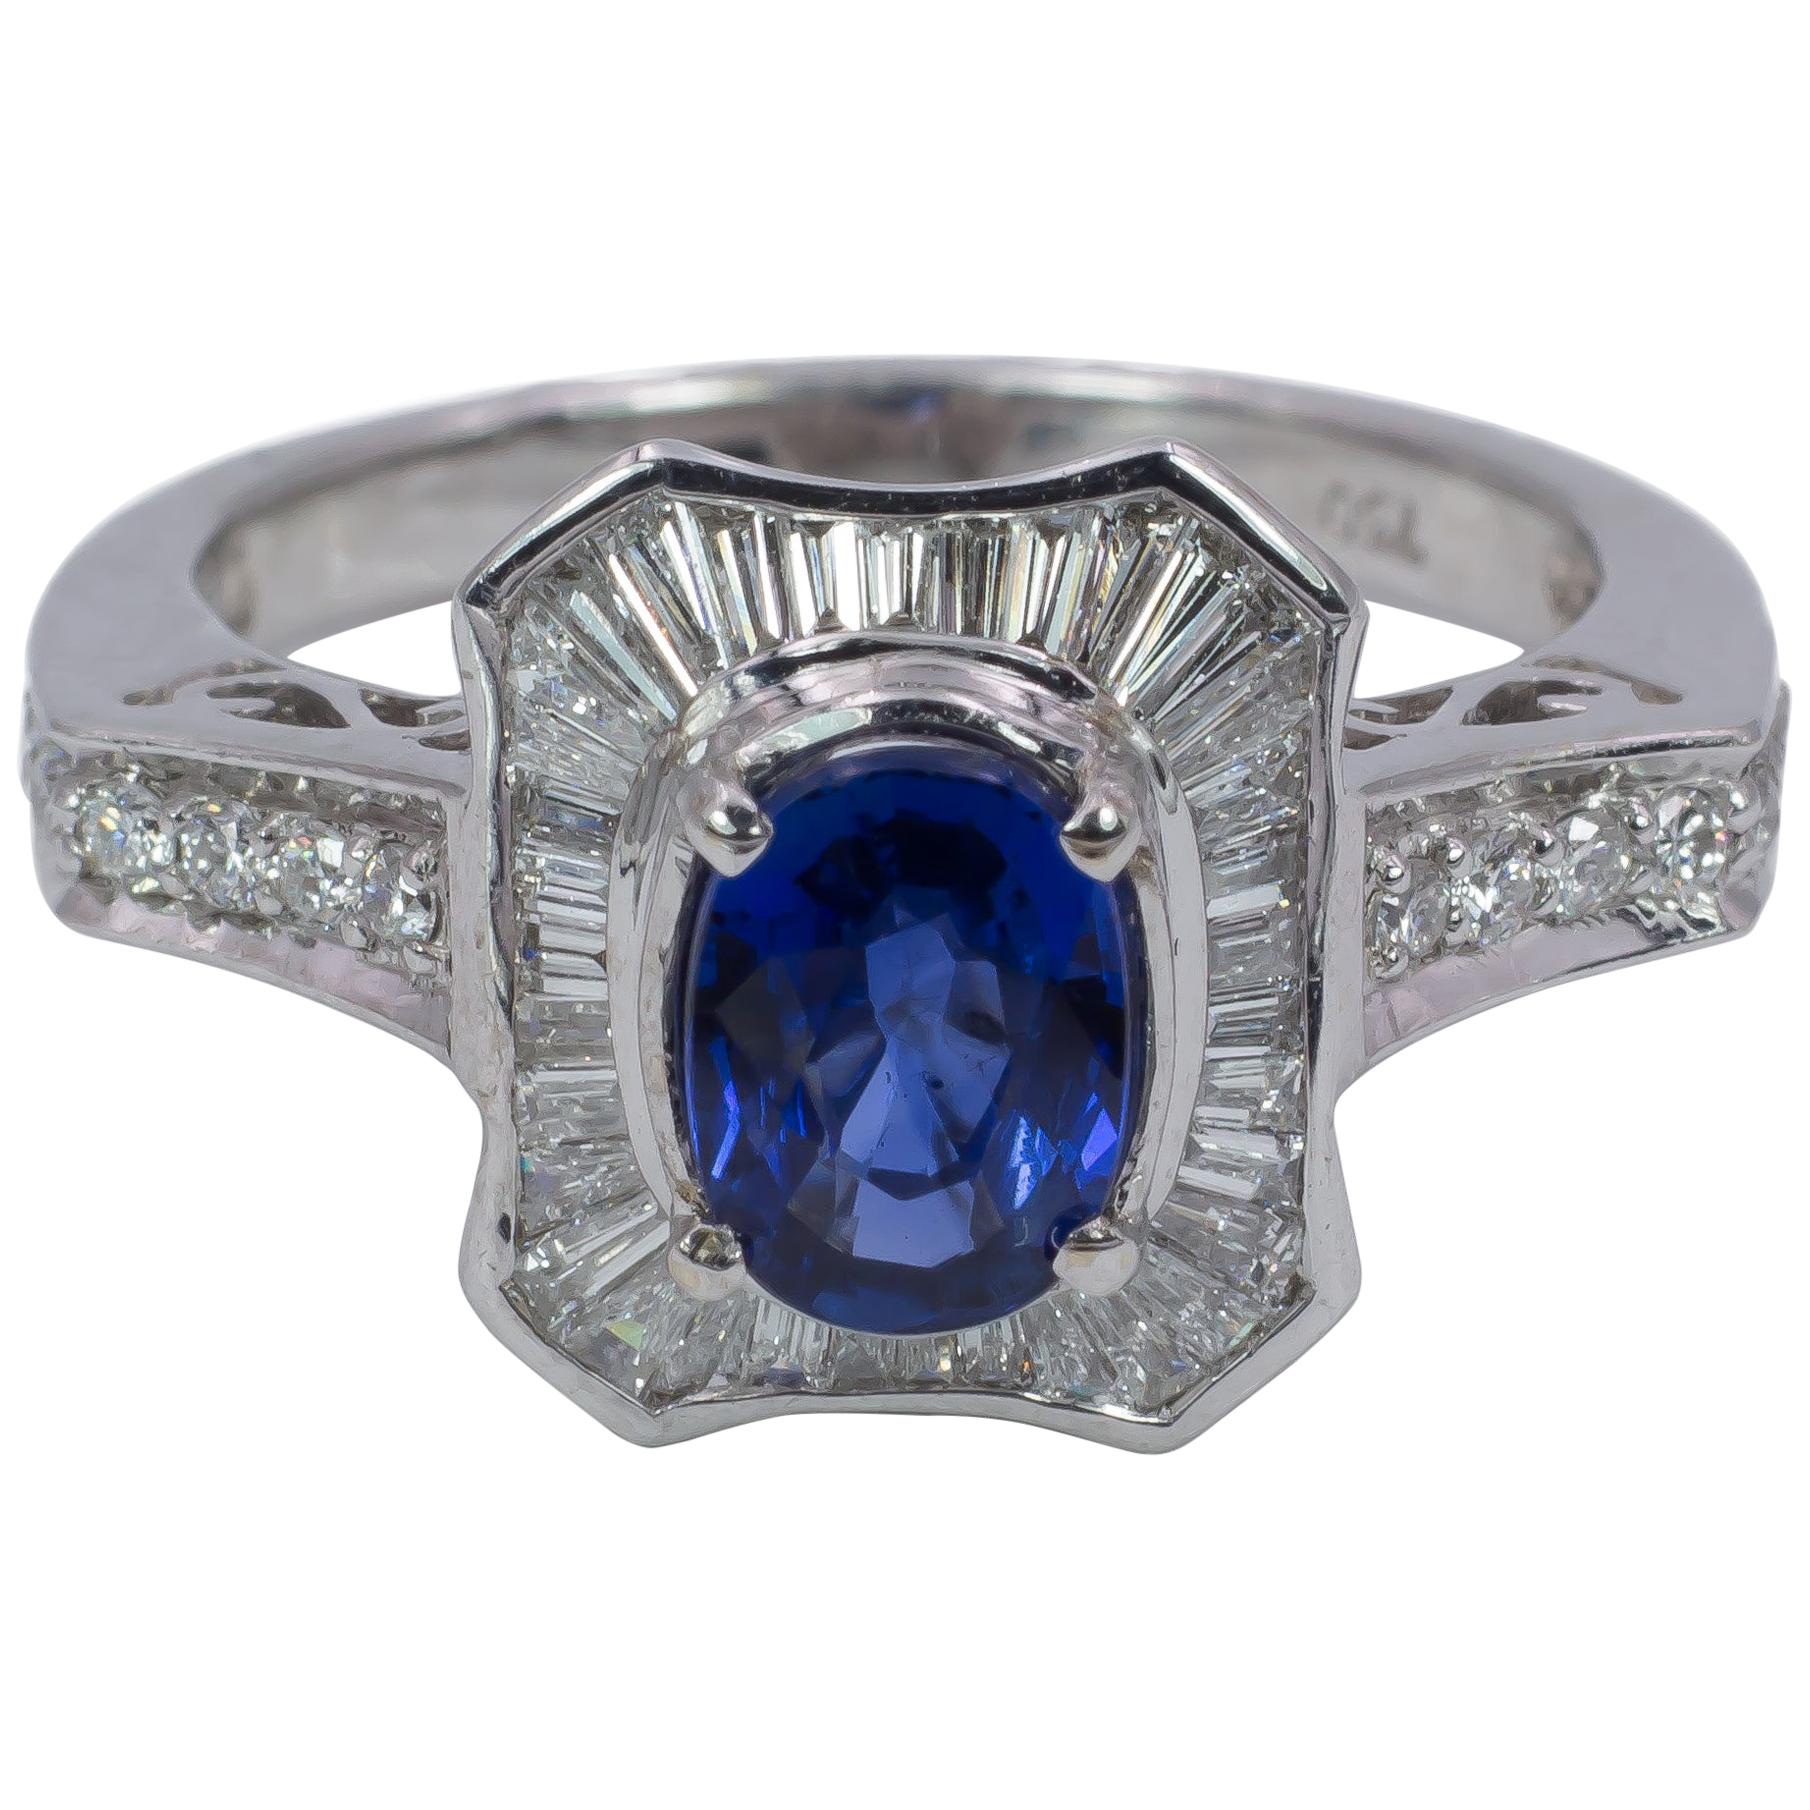 Vintage 18 Karat White Gold, Sapphire and Diamond Ring, 1950s For Sale